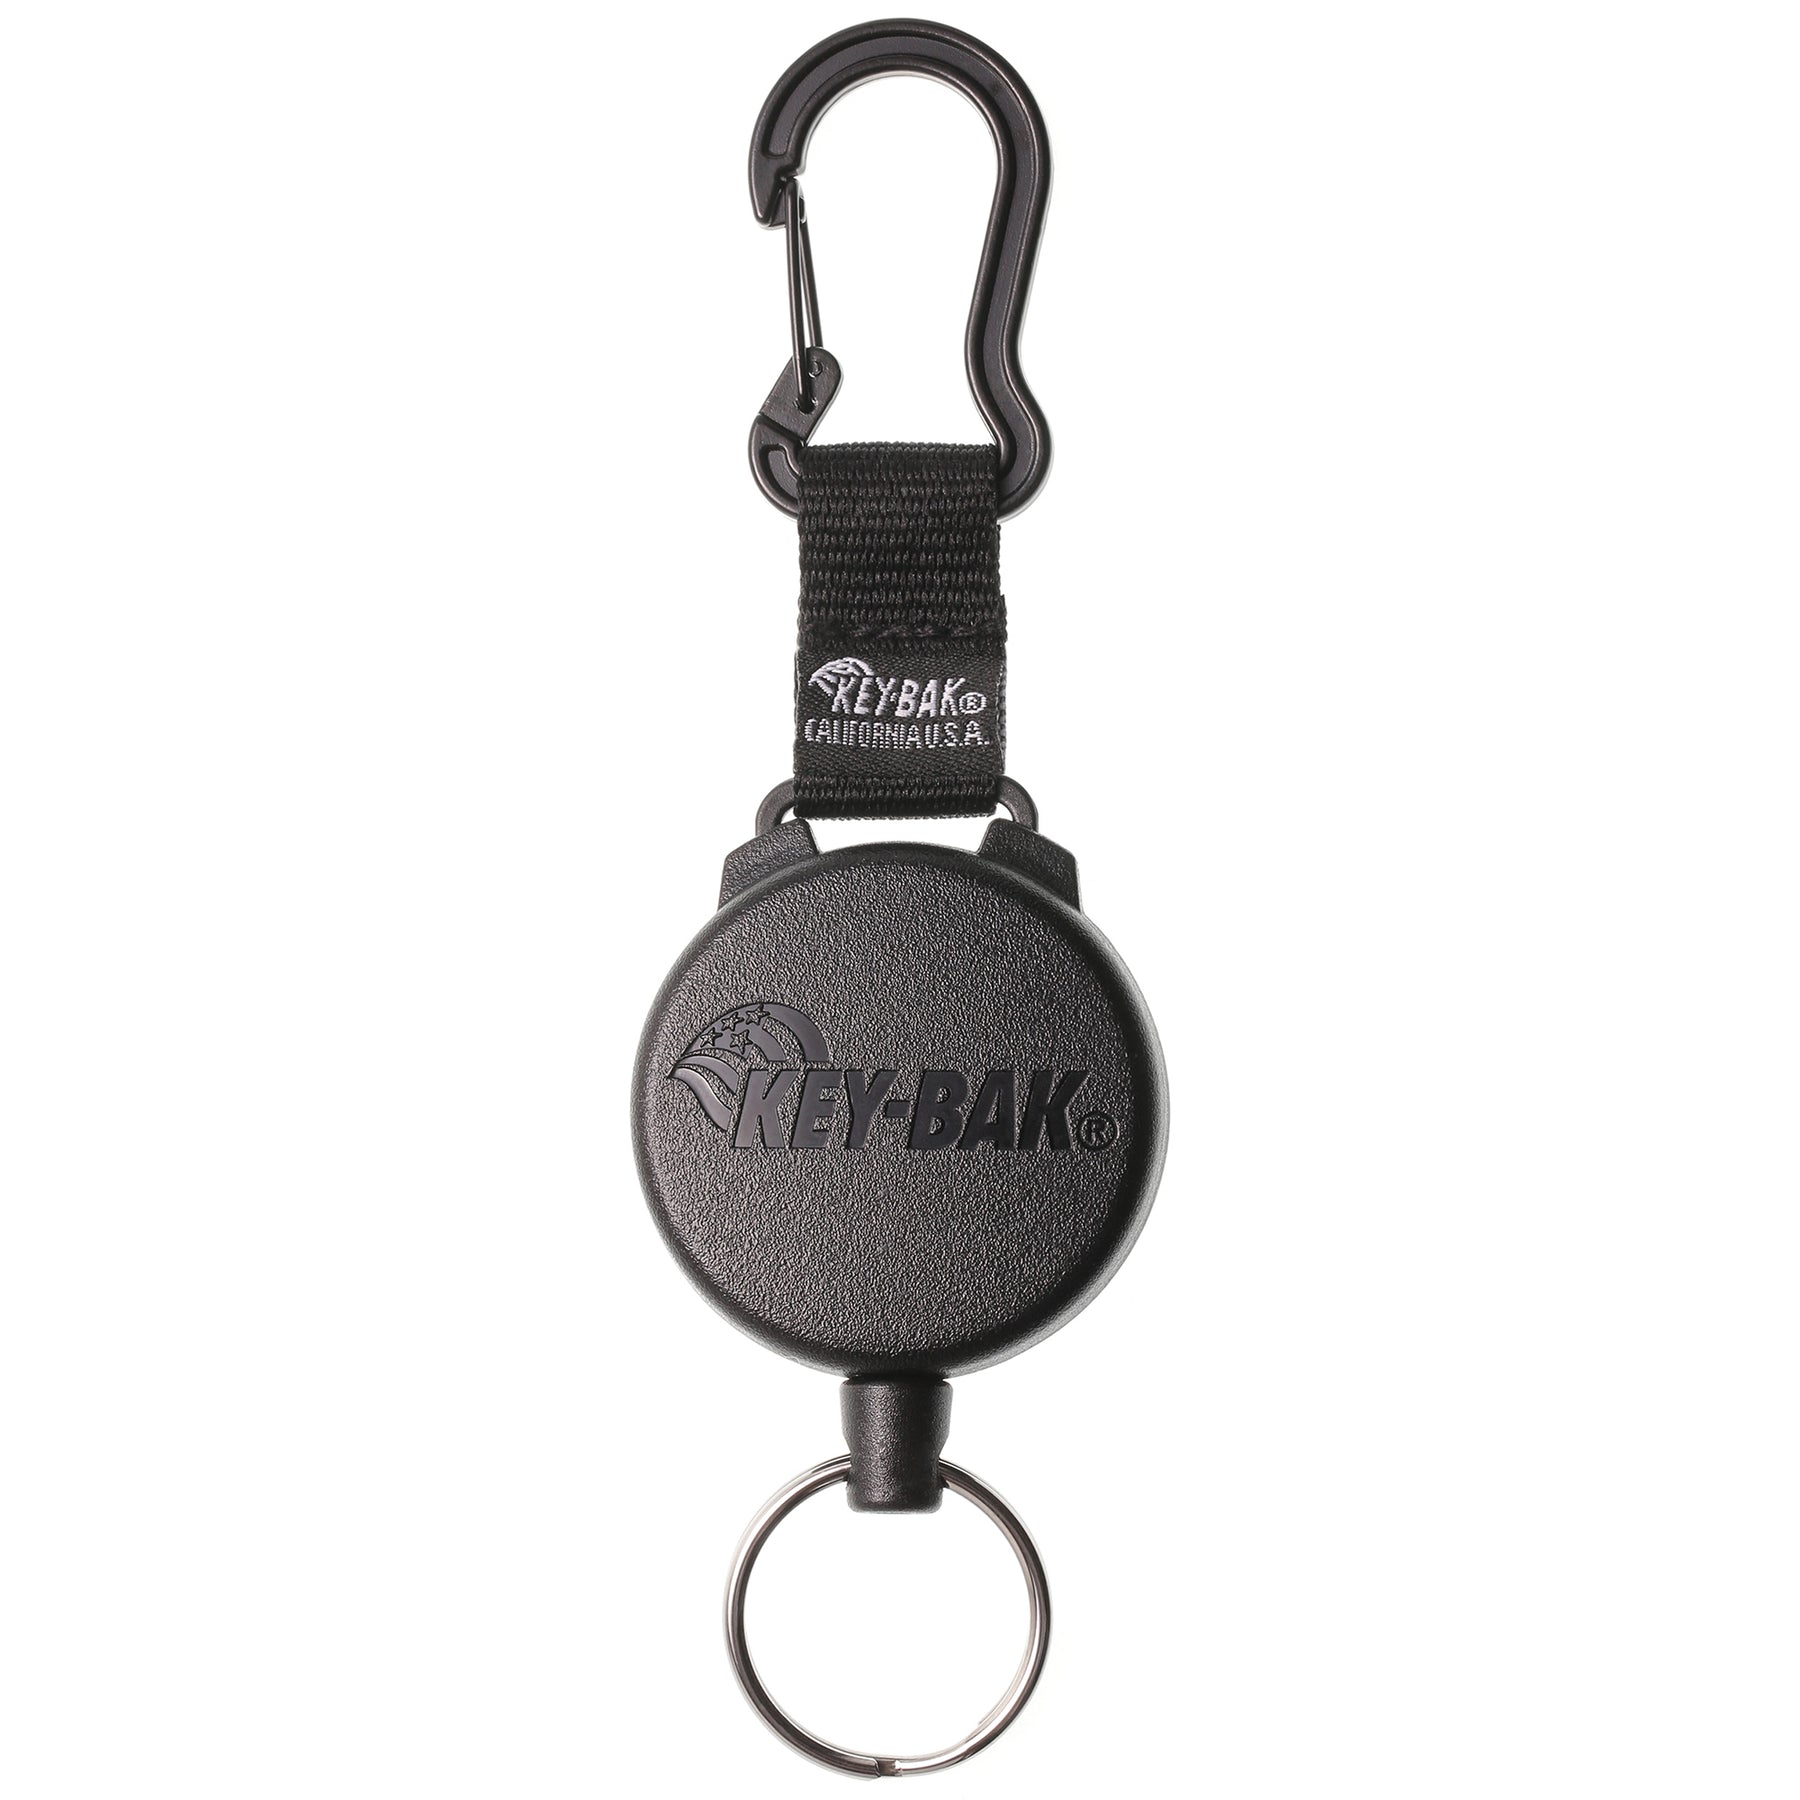 Small S-Carabiner for Hoist/Retrieval Line & Accessories